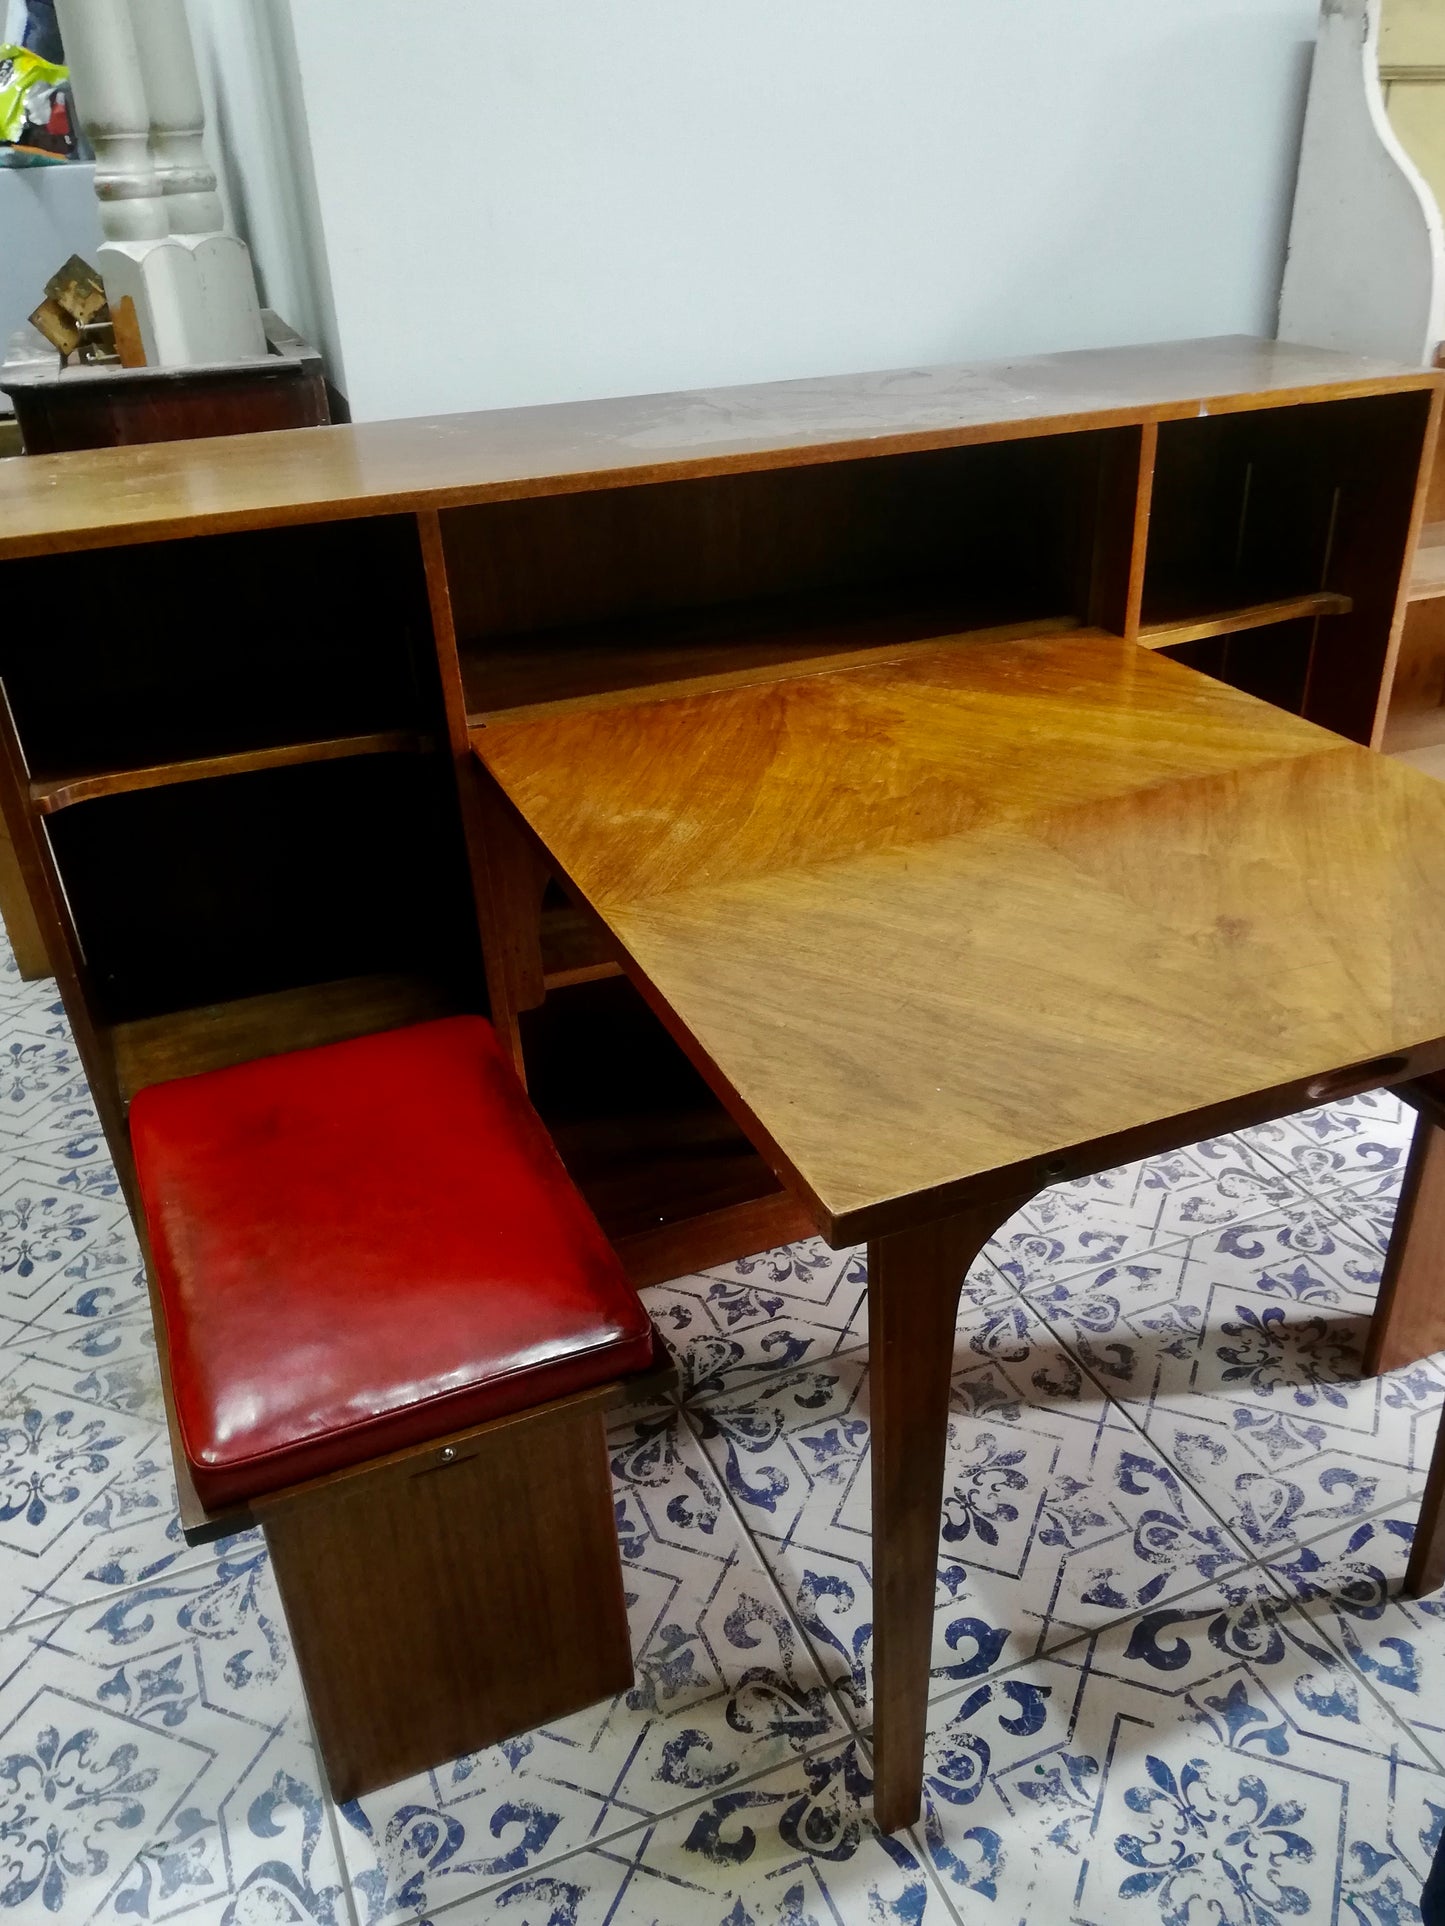 Super cool Vintage  sideboard that folds out into table and chairs